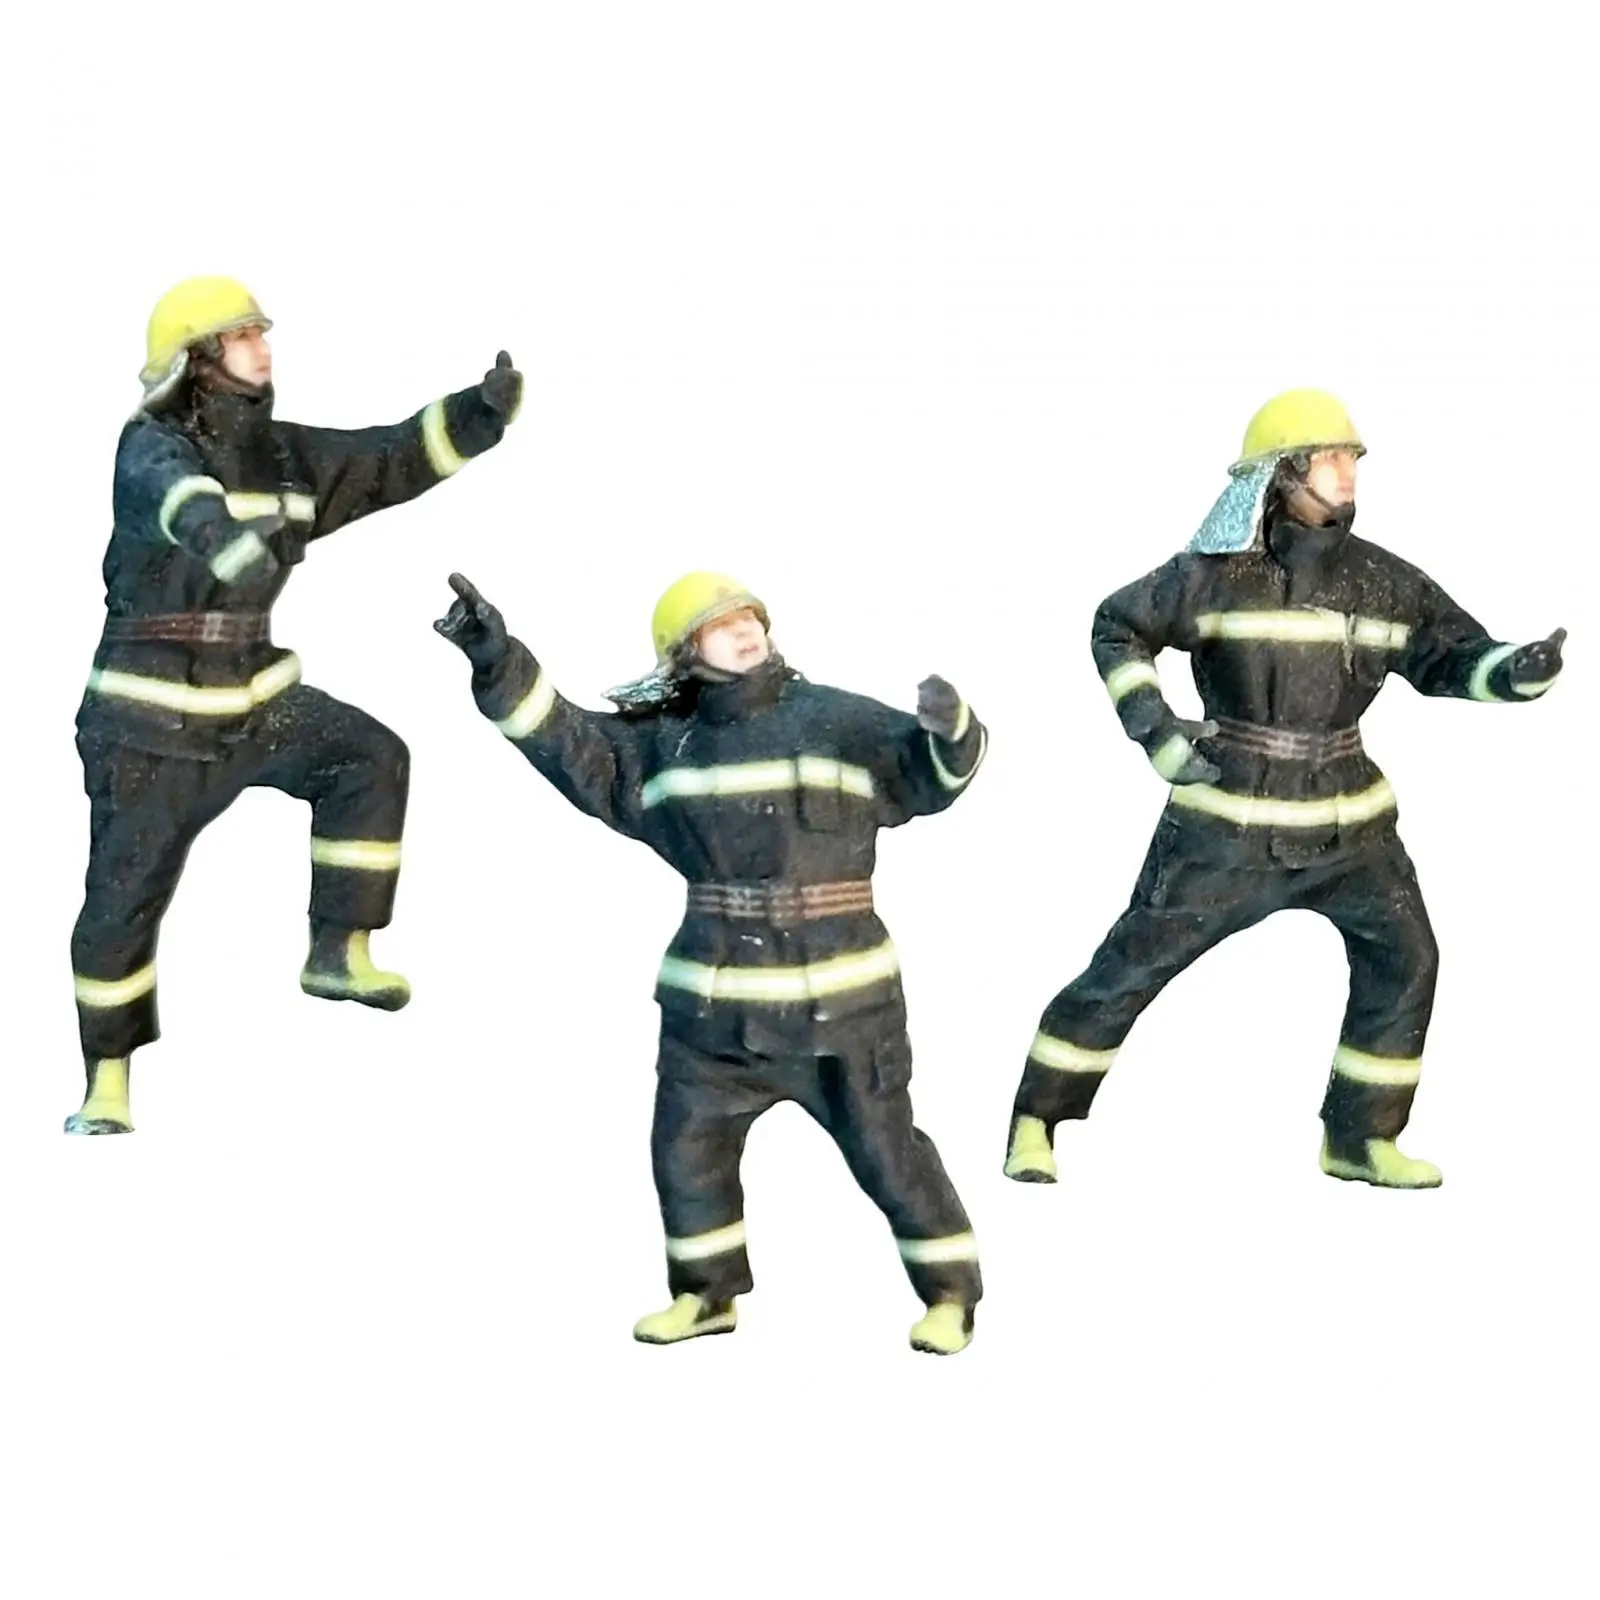 

3 Pieces Firefighter Model Collection Tiny People Model for Diorama Photography Props Miniature Scene Accessories Layout